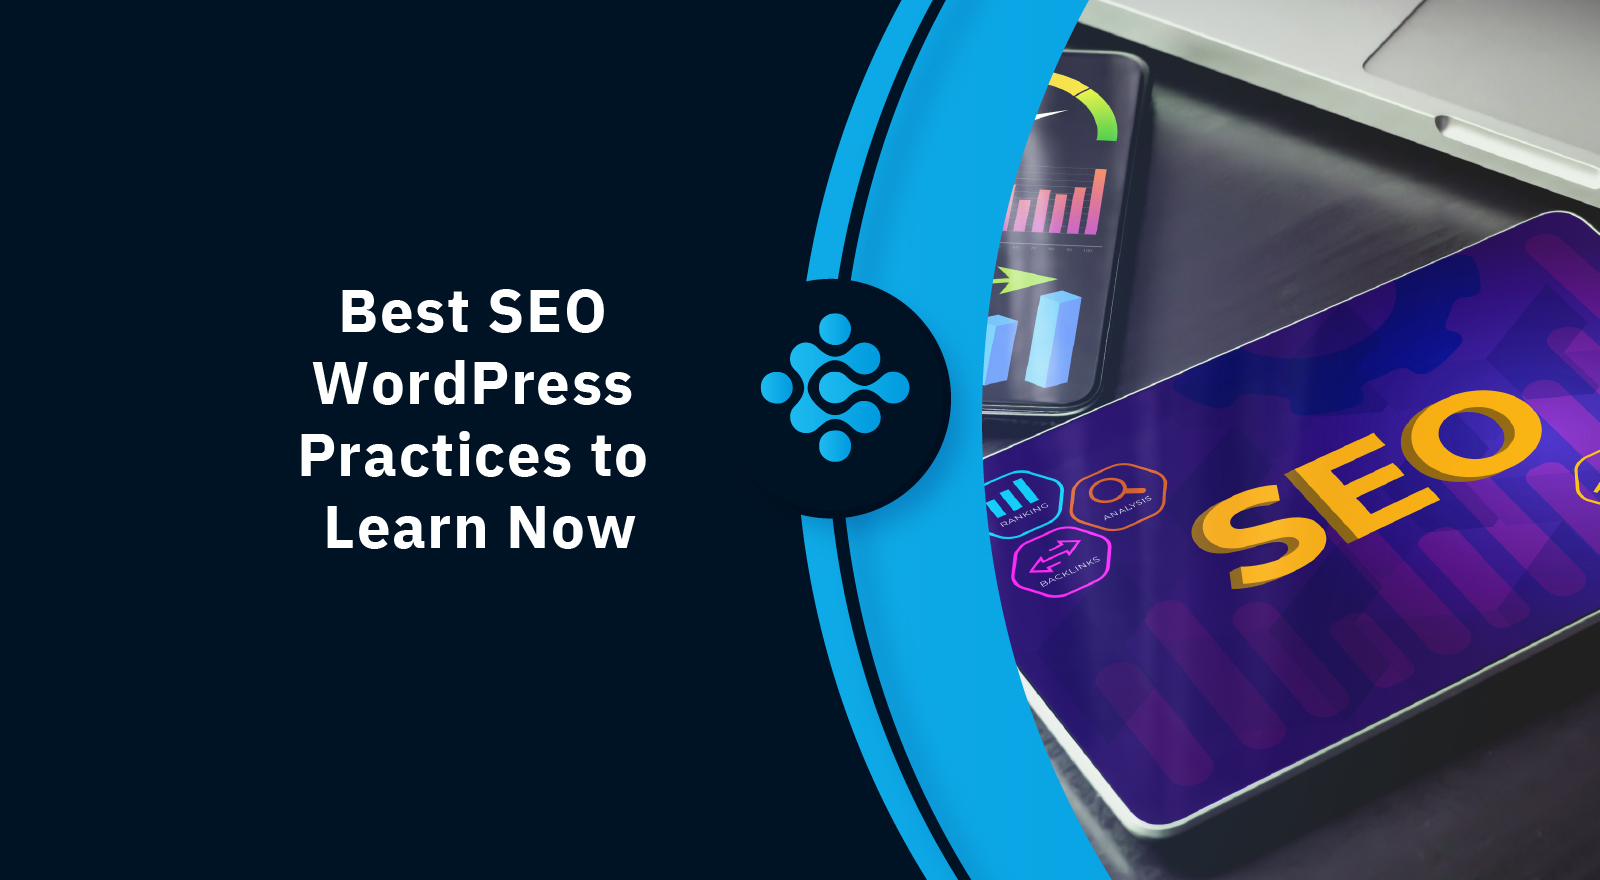 Best SEO WordPress Practices to Learn Now